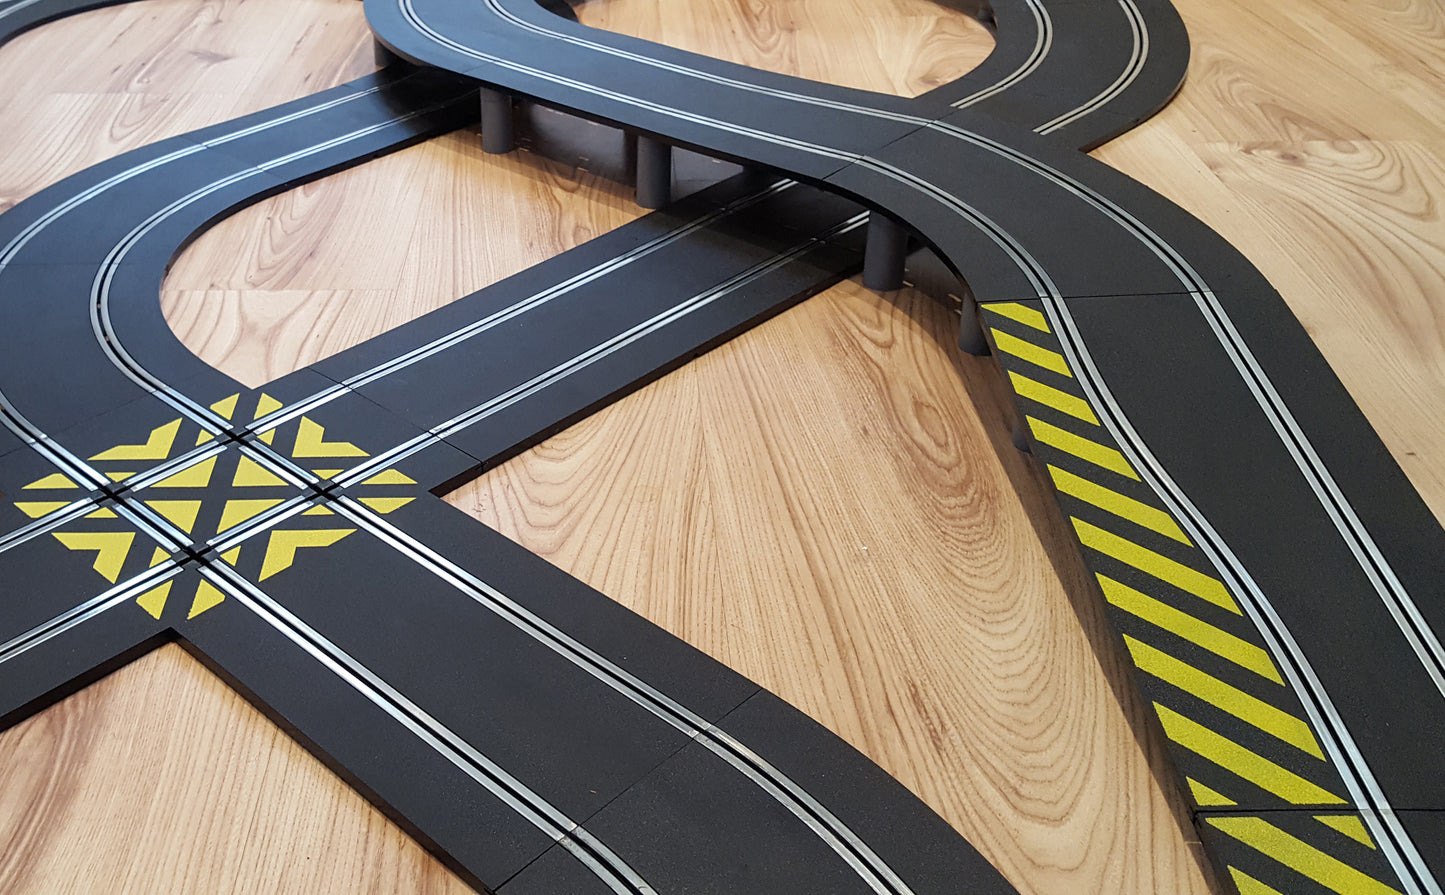 Scalextric 1:32 Figure-Of-Eight Layout Set ARC Pro With Veyron Cars